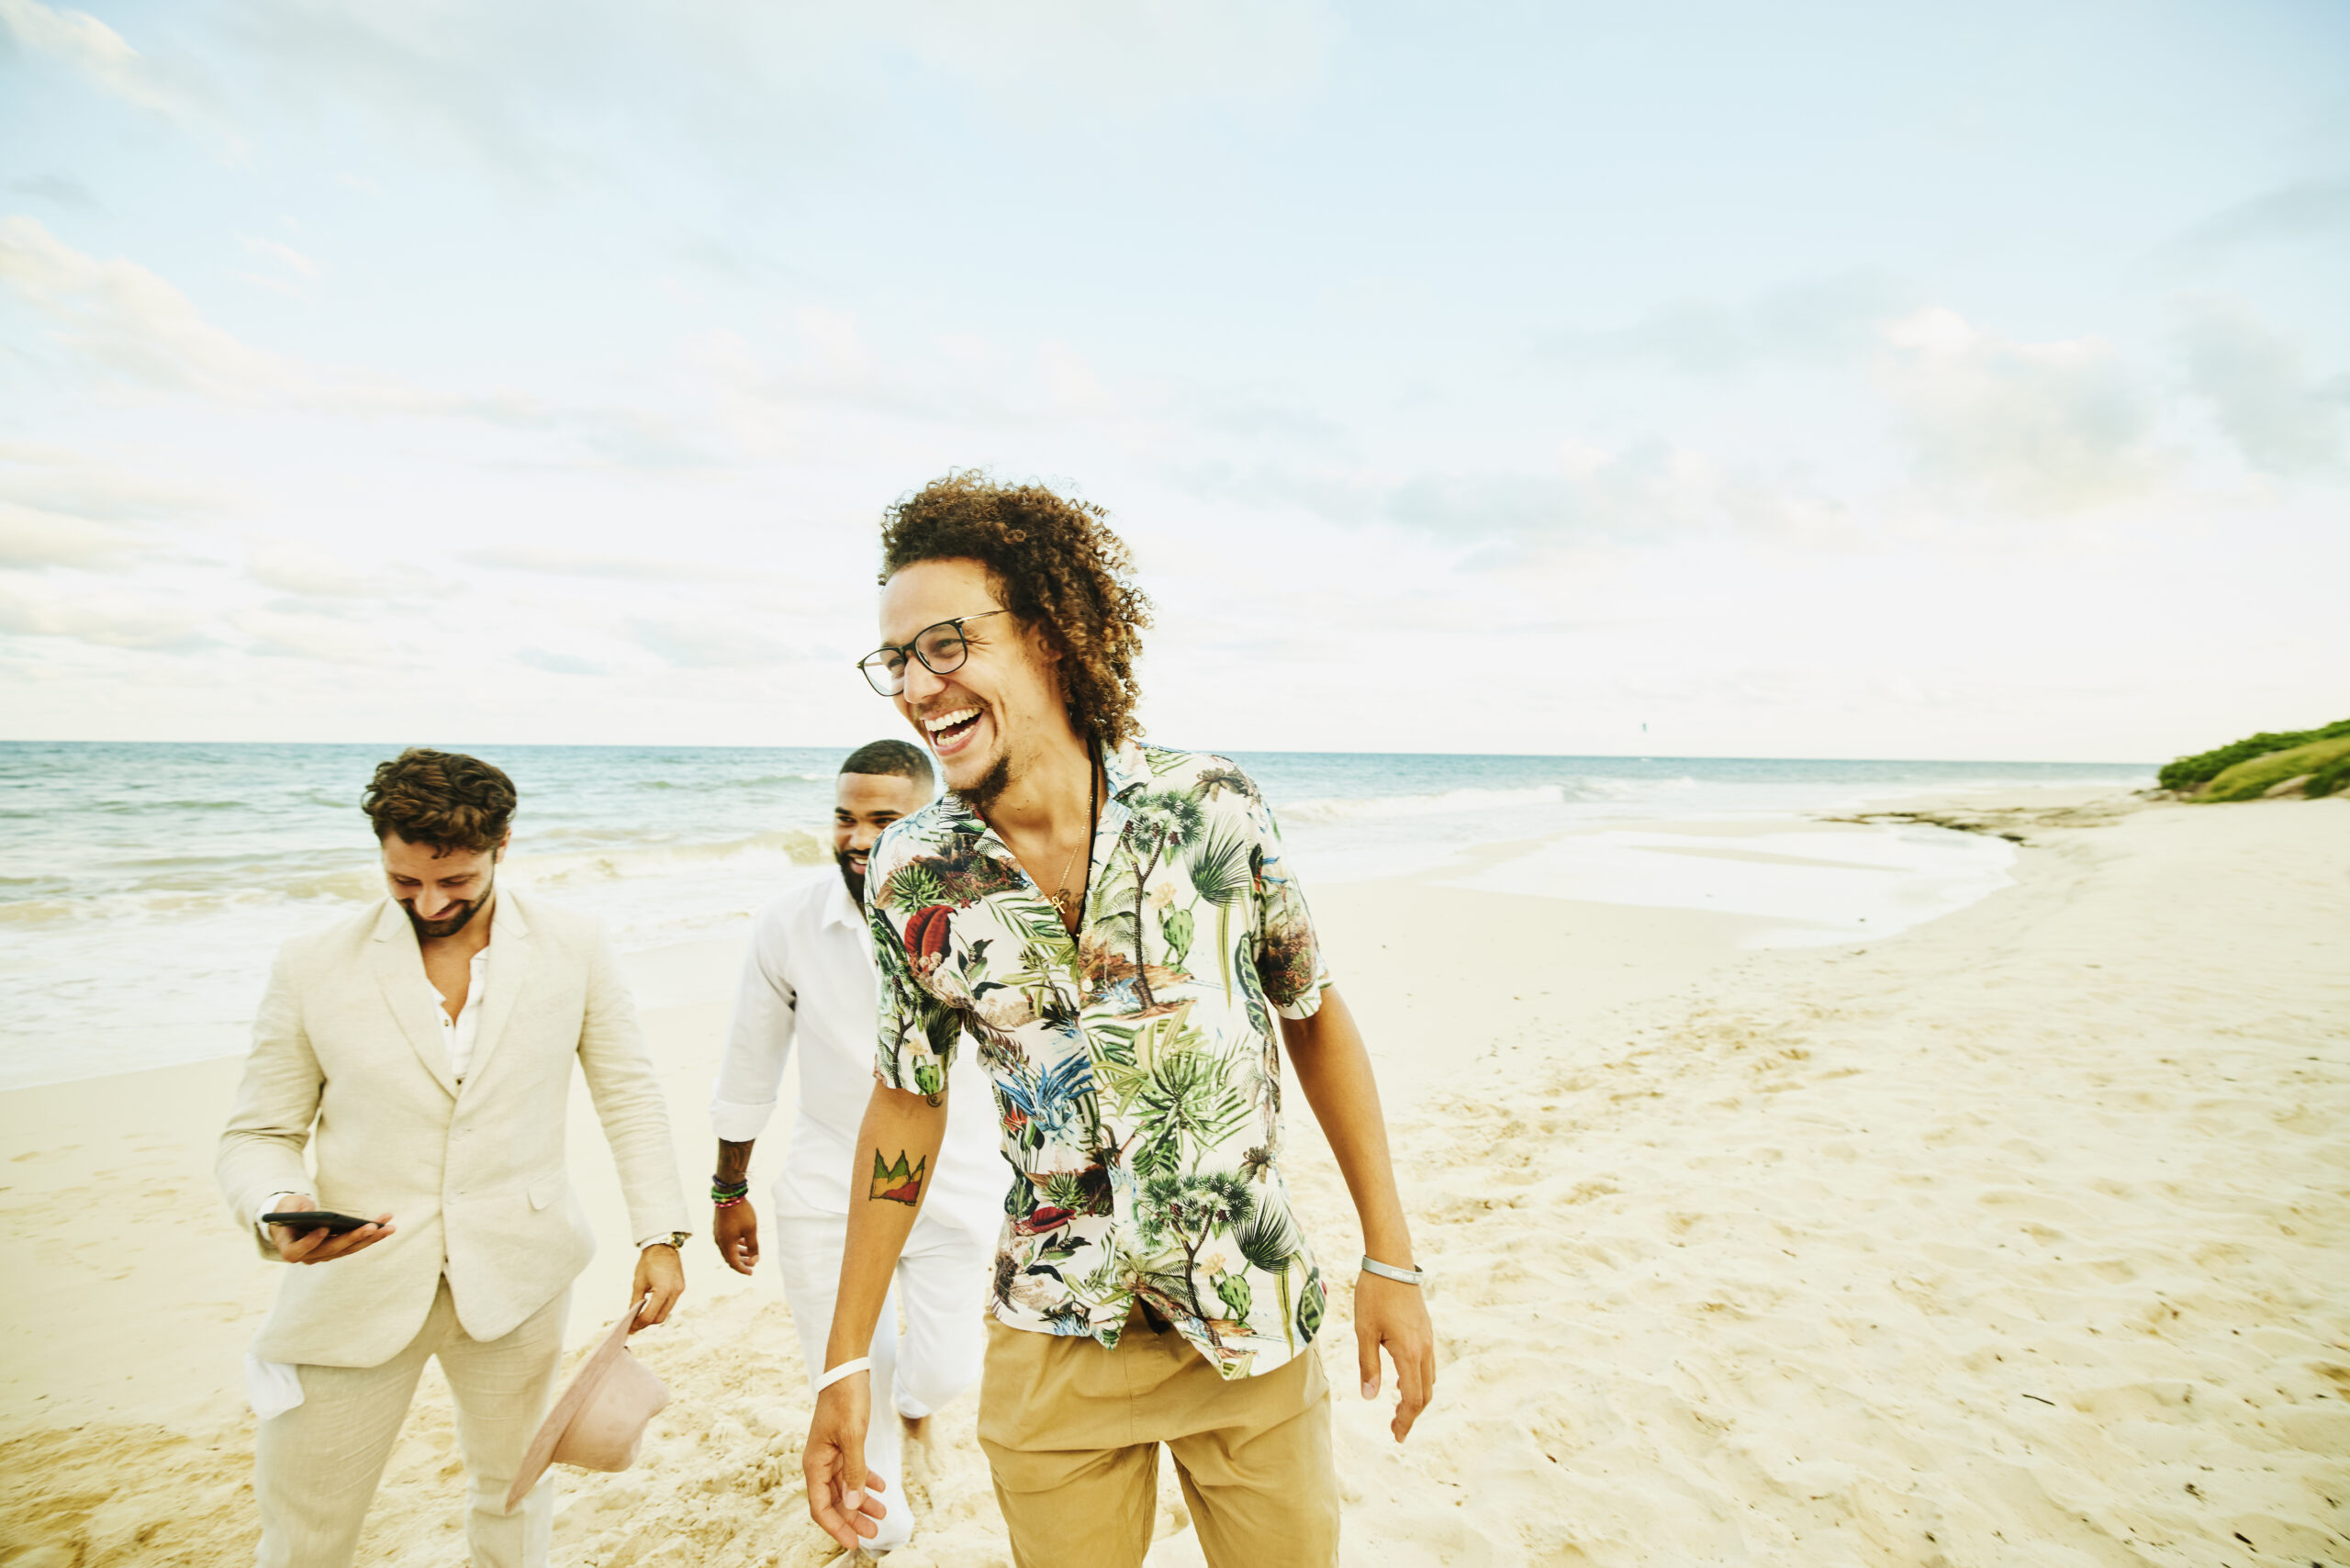 Medium wide shot of laughing man hanging out with friends after tropical beach wedding